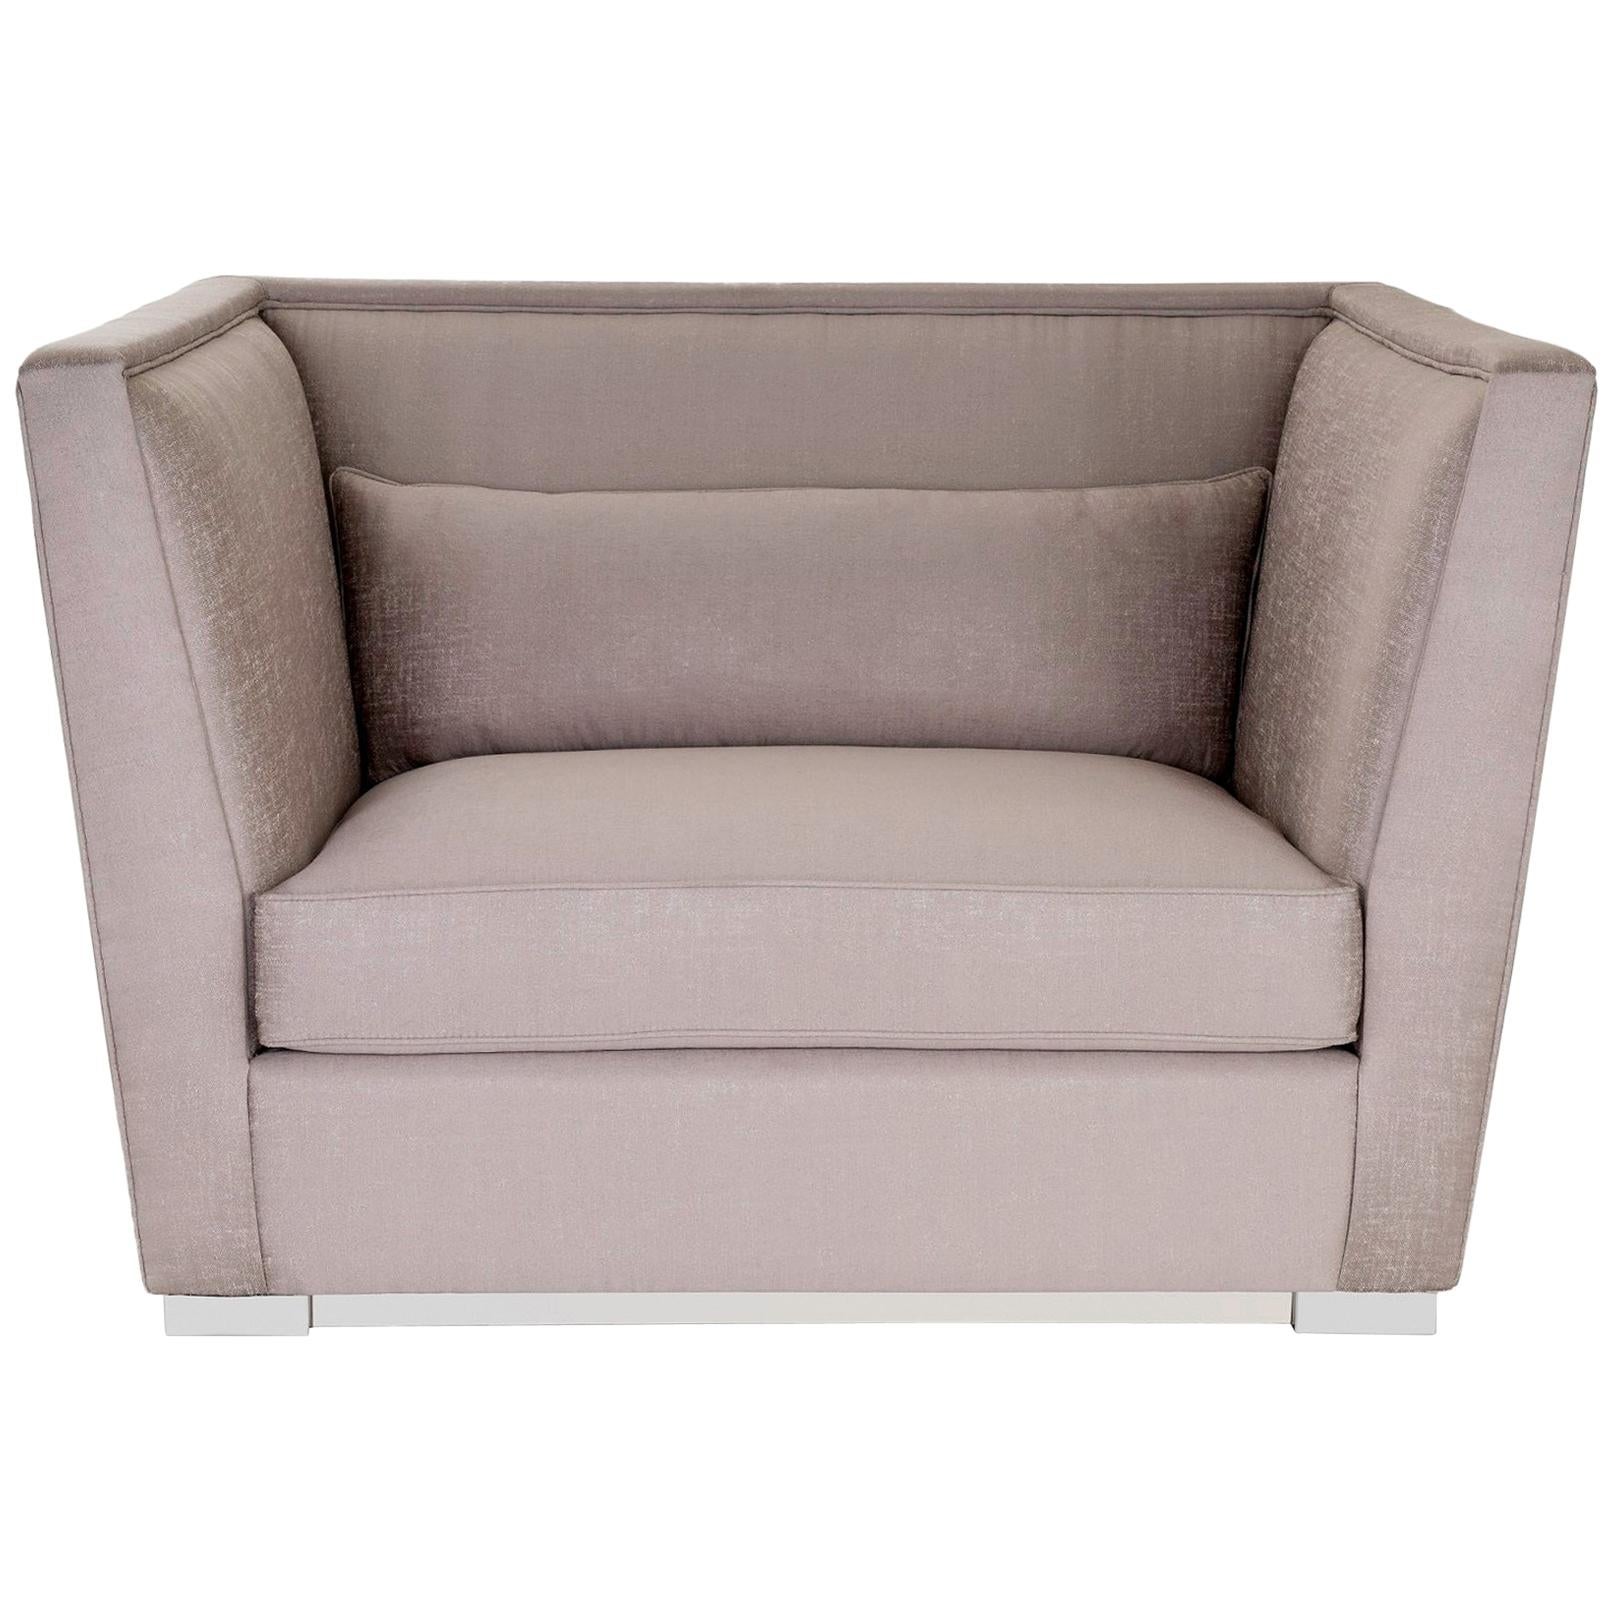 Beige Baron Loveseat with Stainless Steel Plinth